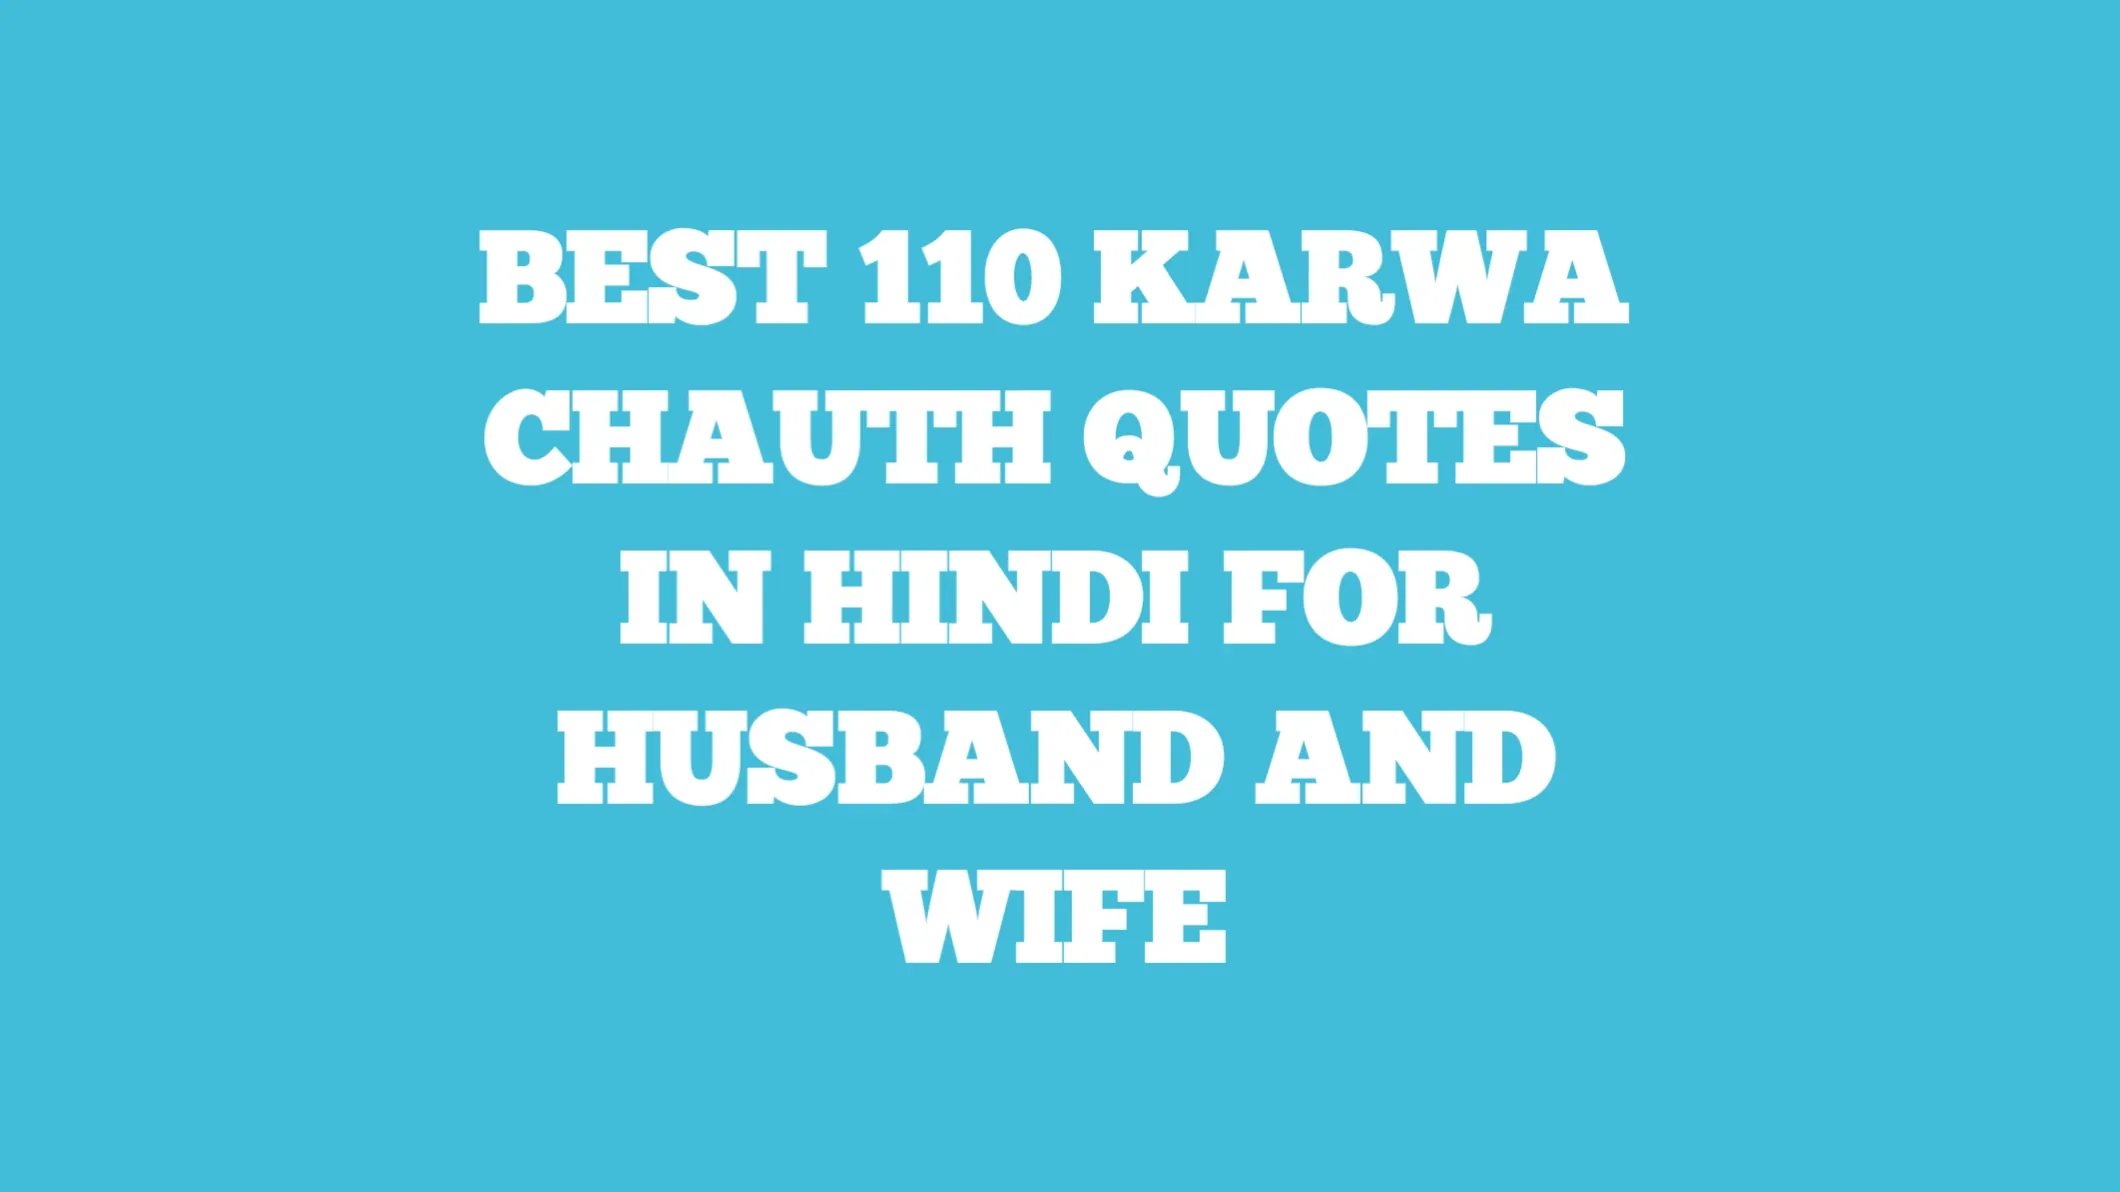 karwa chauth quotes for husband